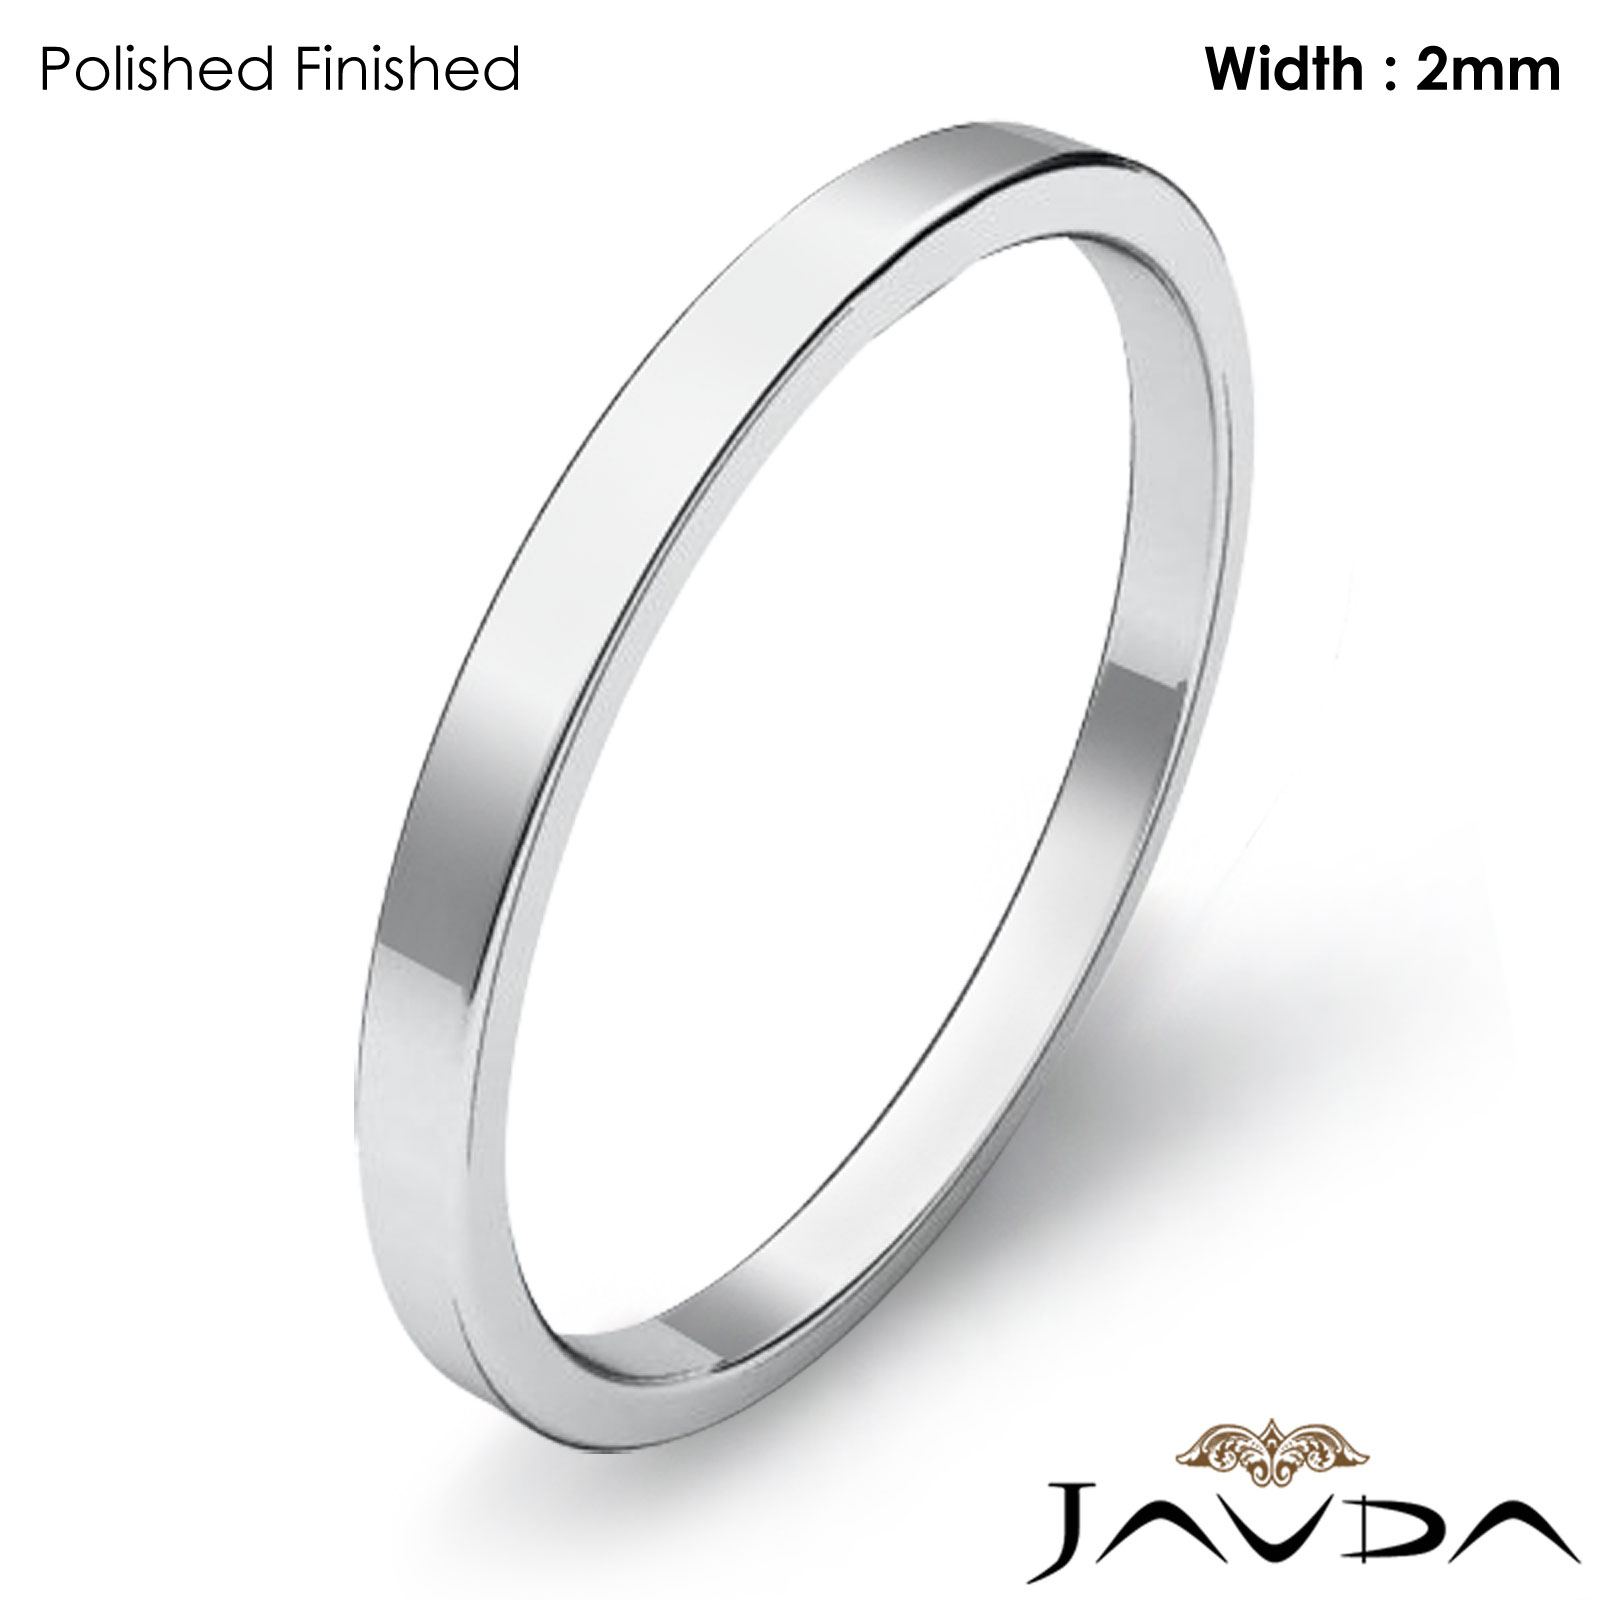 Mens 14K White Gold 2mm Flat Traditional Wedding Band Ring 